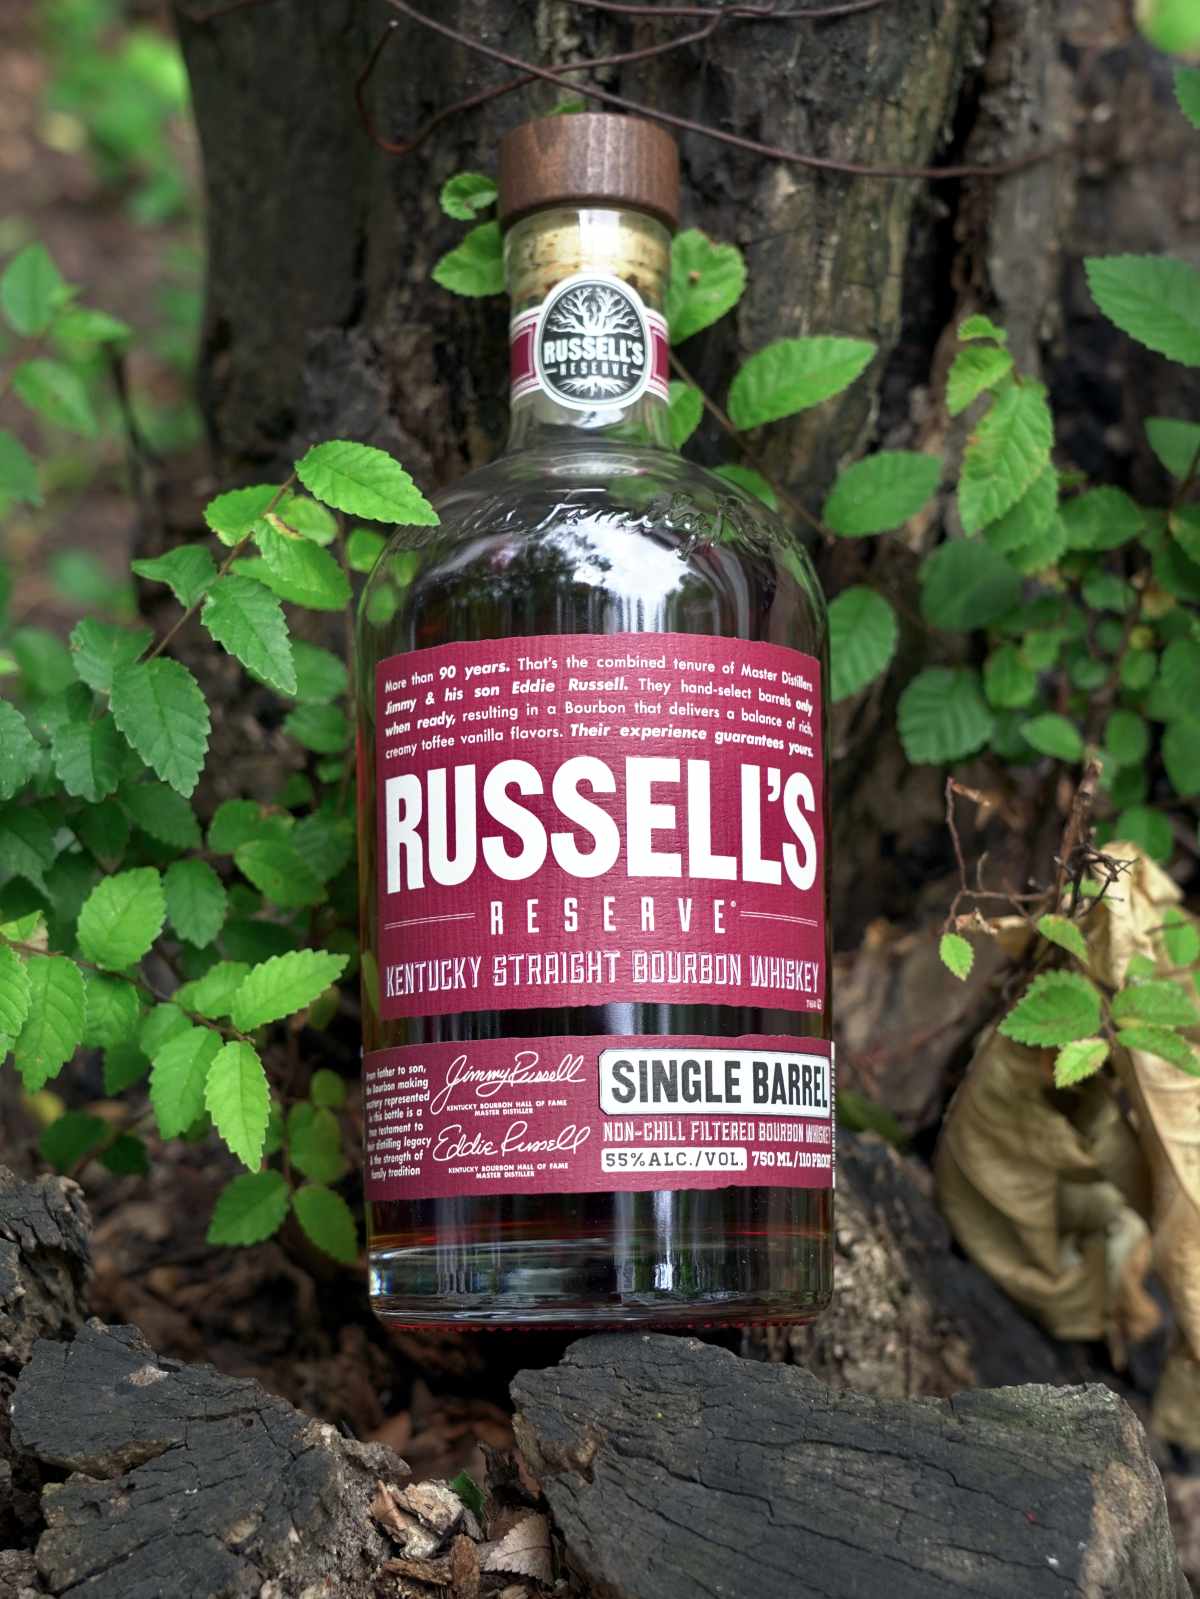 Russell’s Reserve Single Barrel Bourbon featured